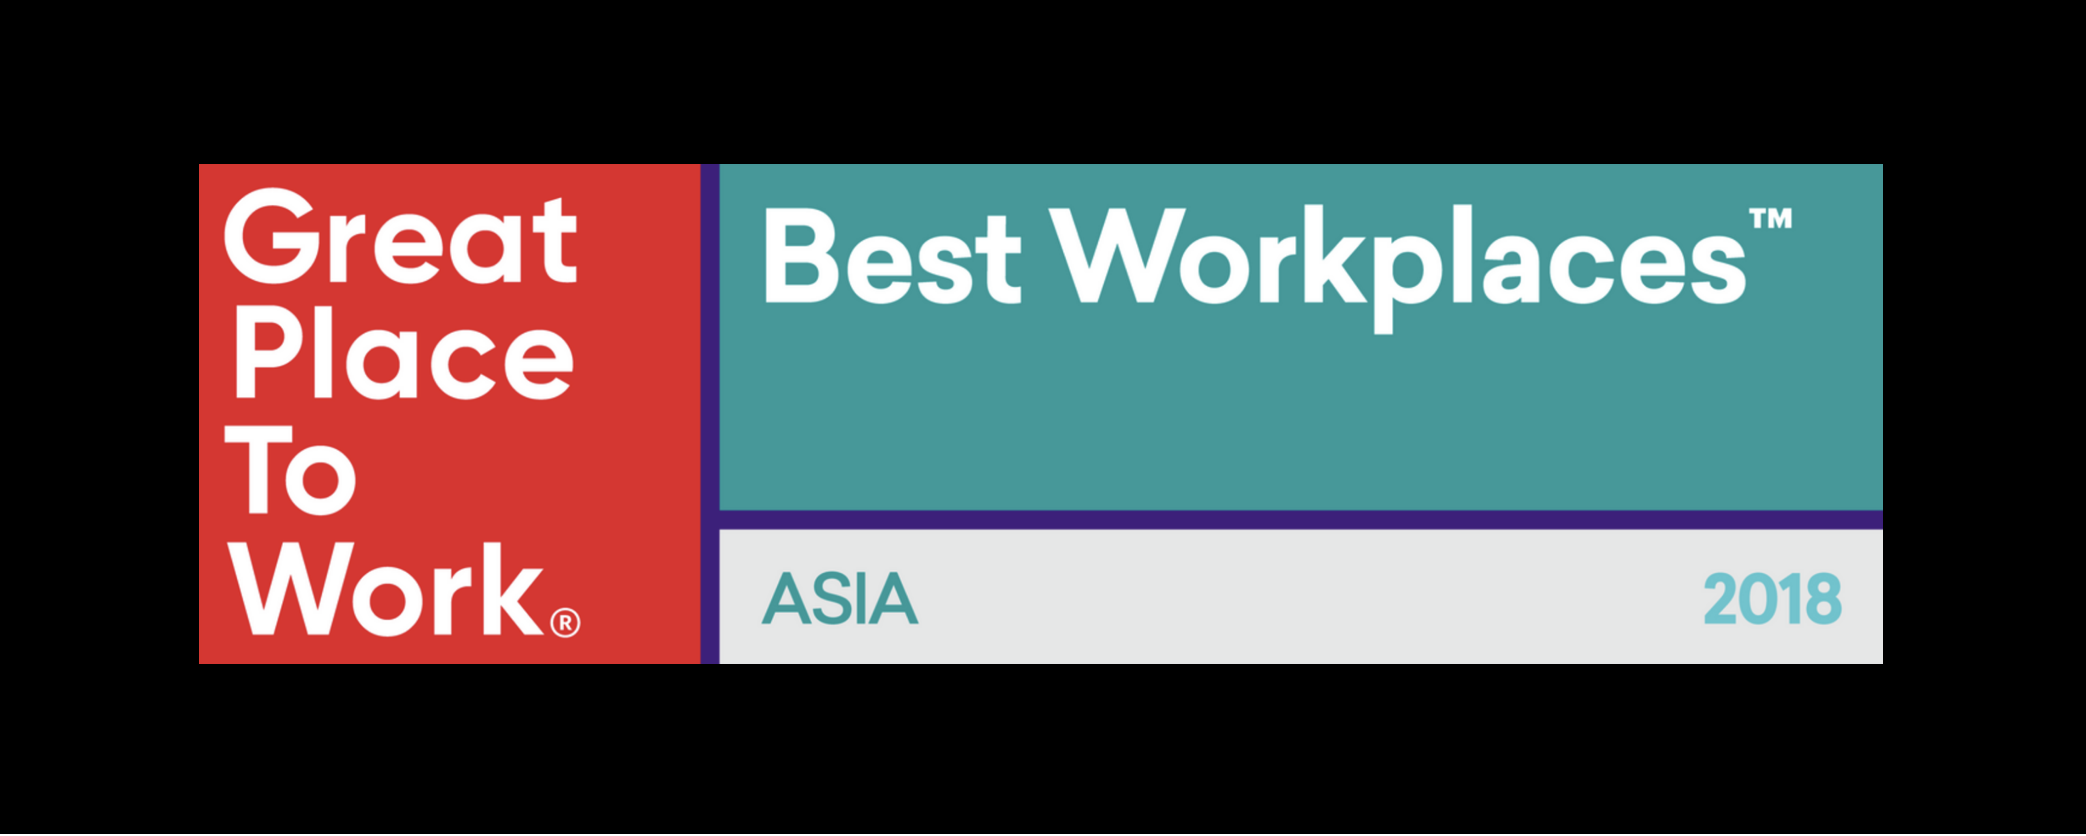 Key learnings from being ranked four consecutive times as one of Asia’s Best Workplaces